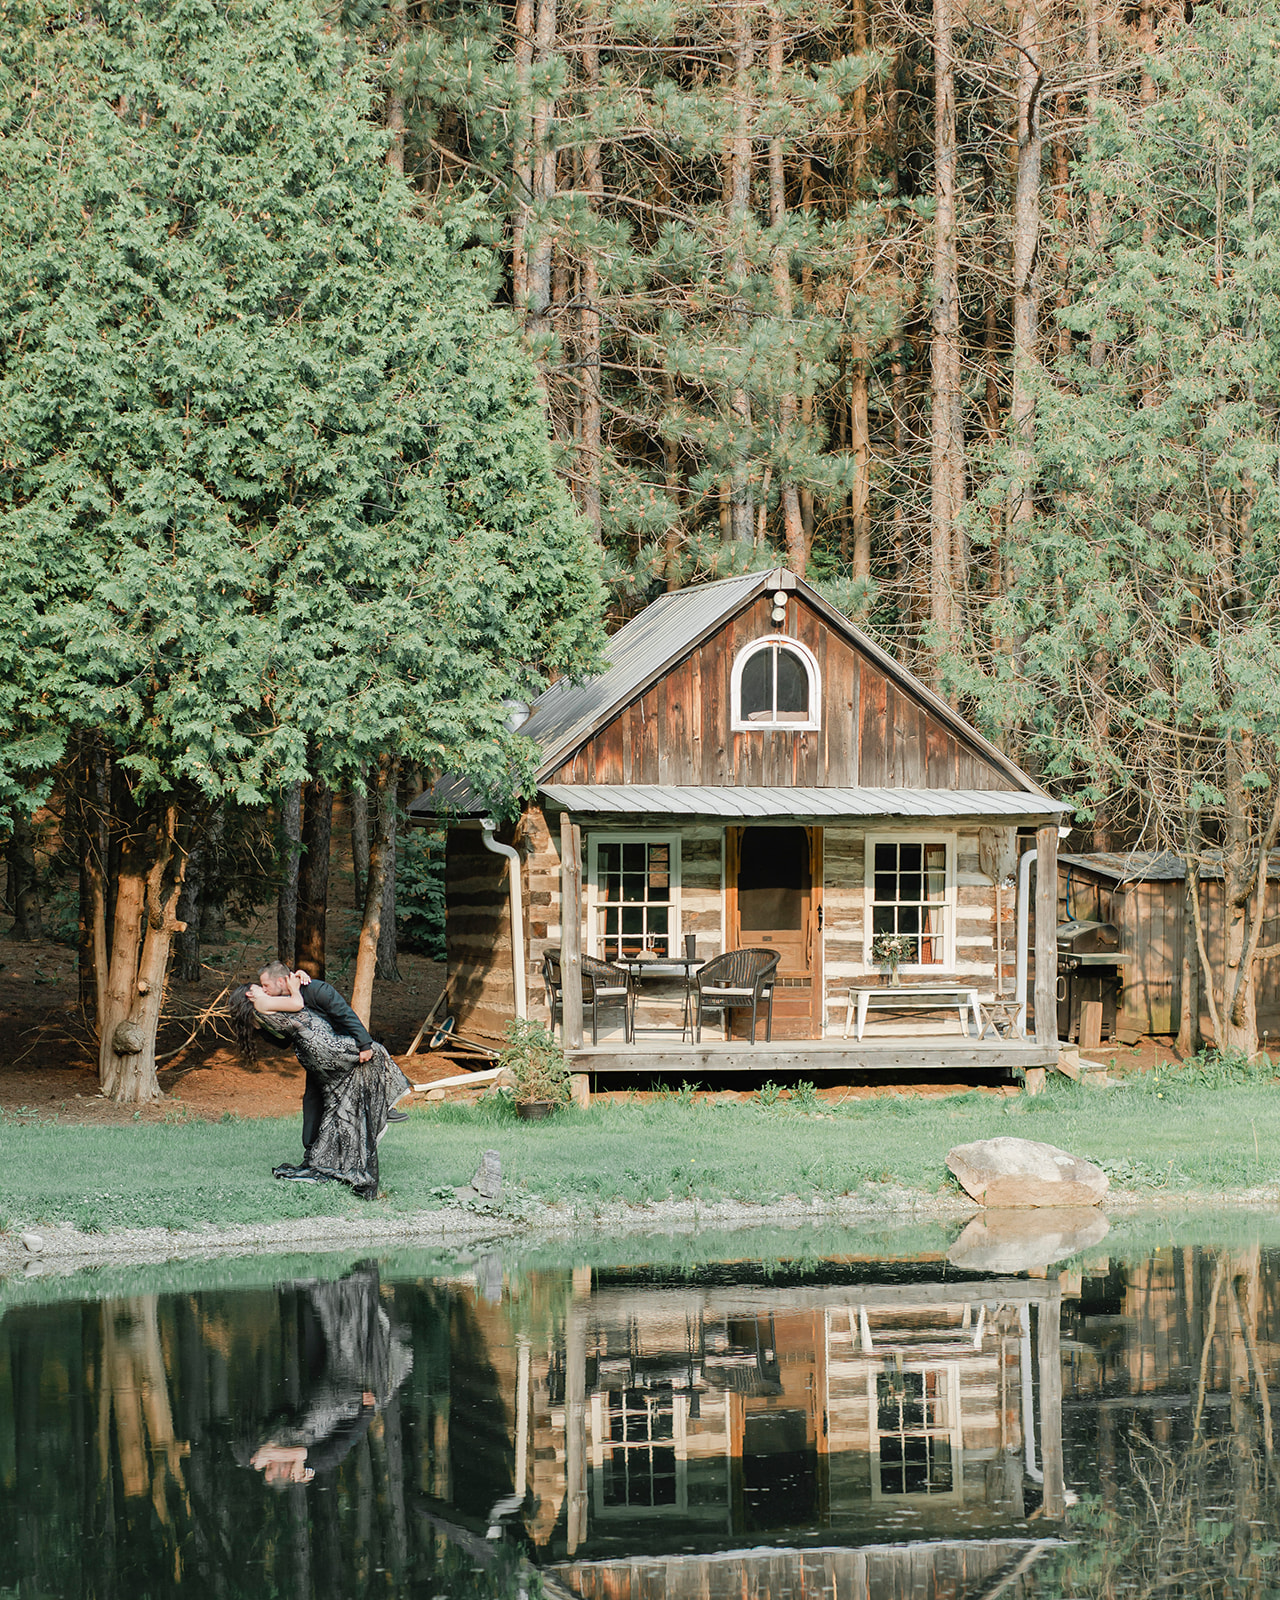 A wedding near Toronto Ontario at a cute cabin in the woods. Paddle boarding adventures! 